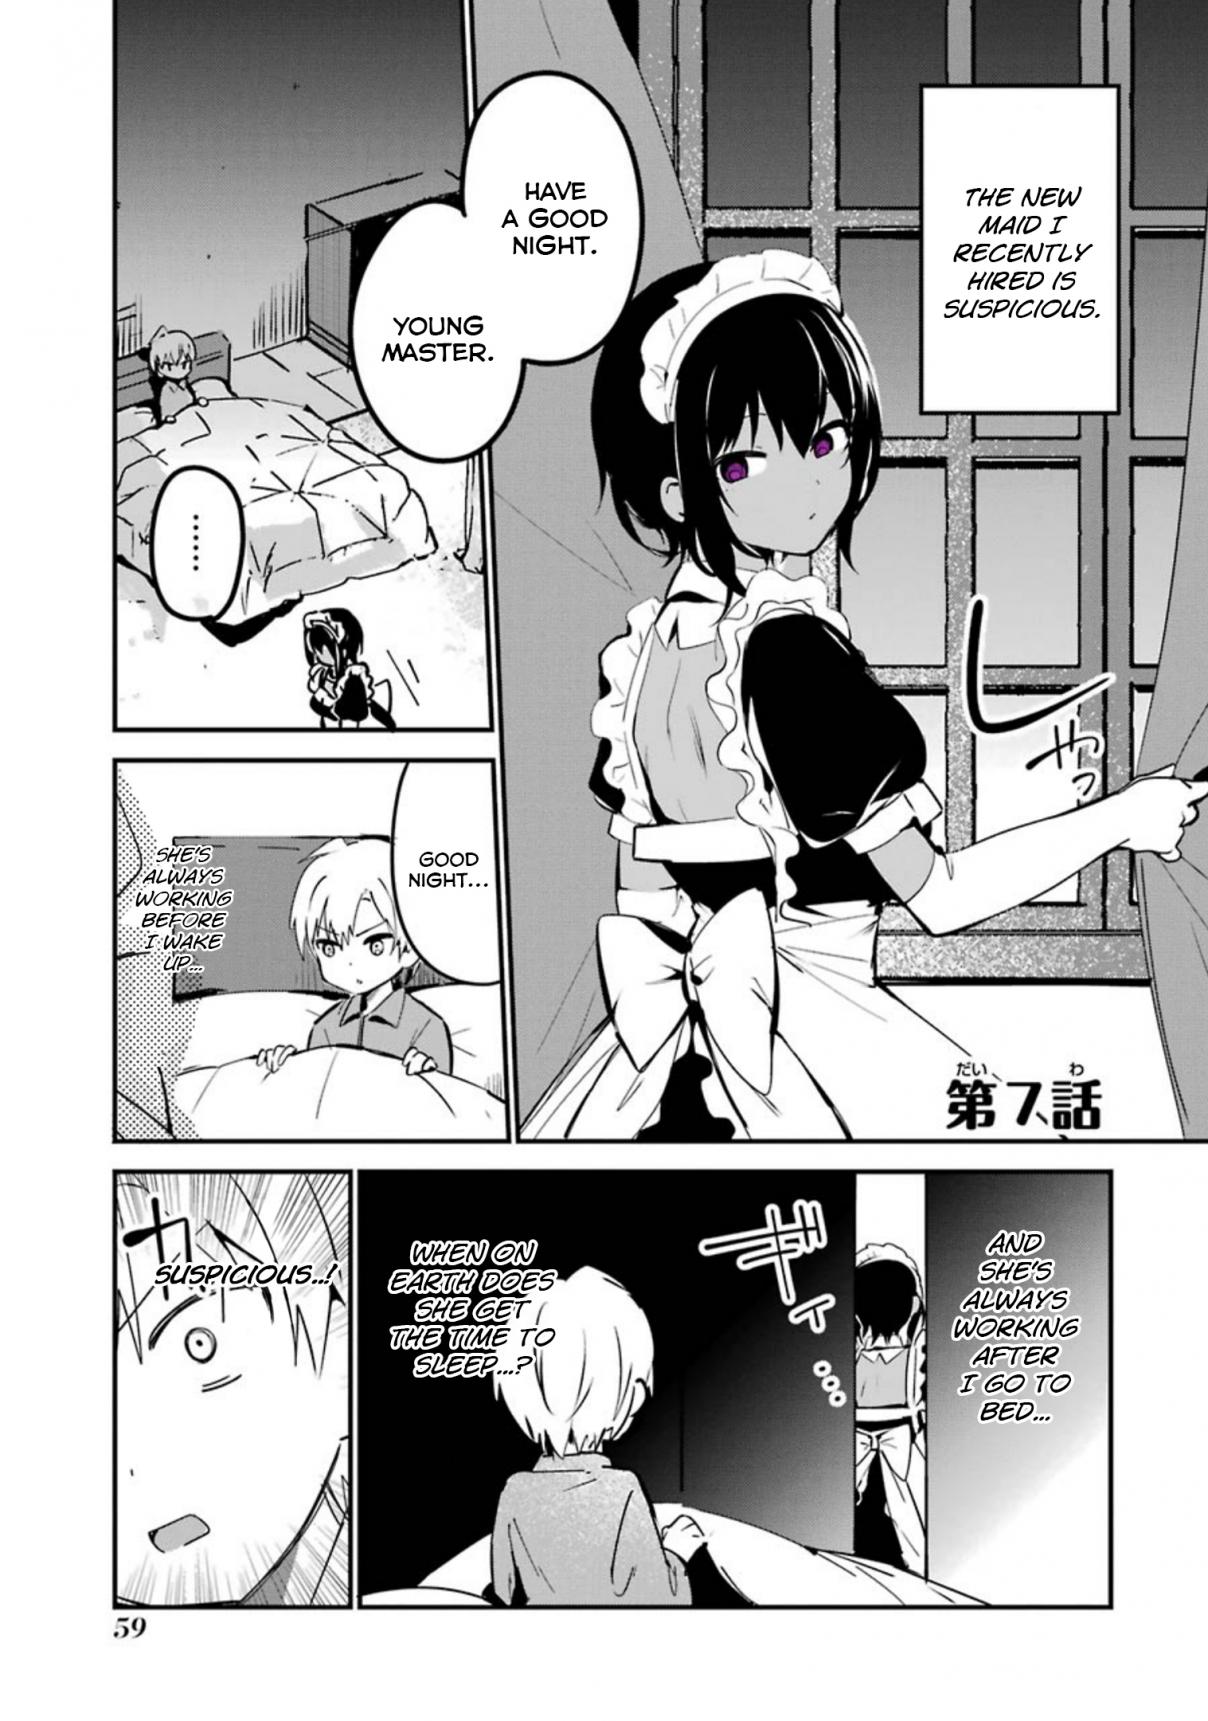 My Recently Hired Maid is Suspicious Vol. 1 Ch. 2.1